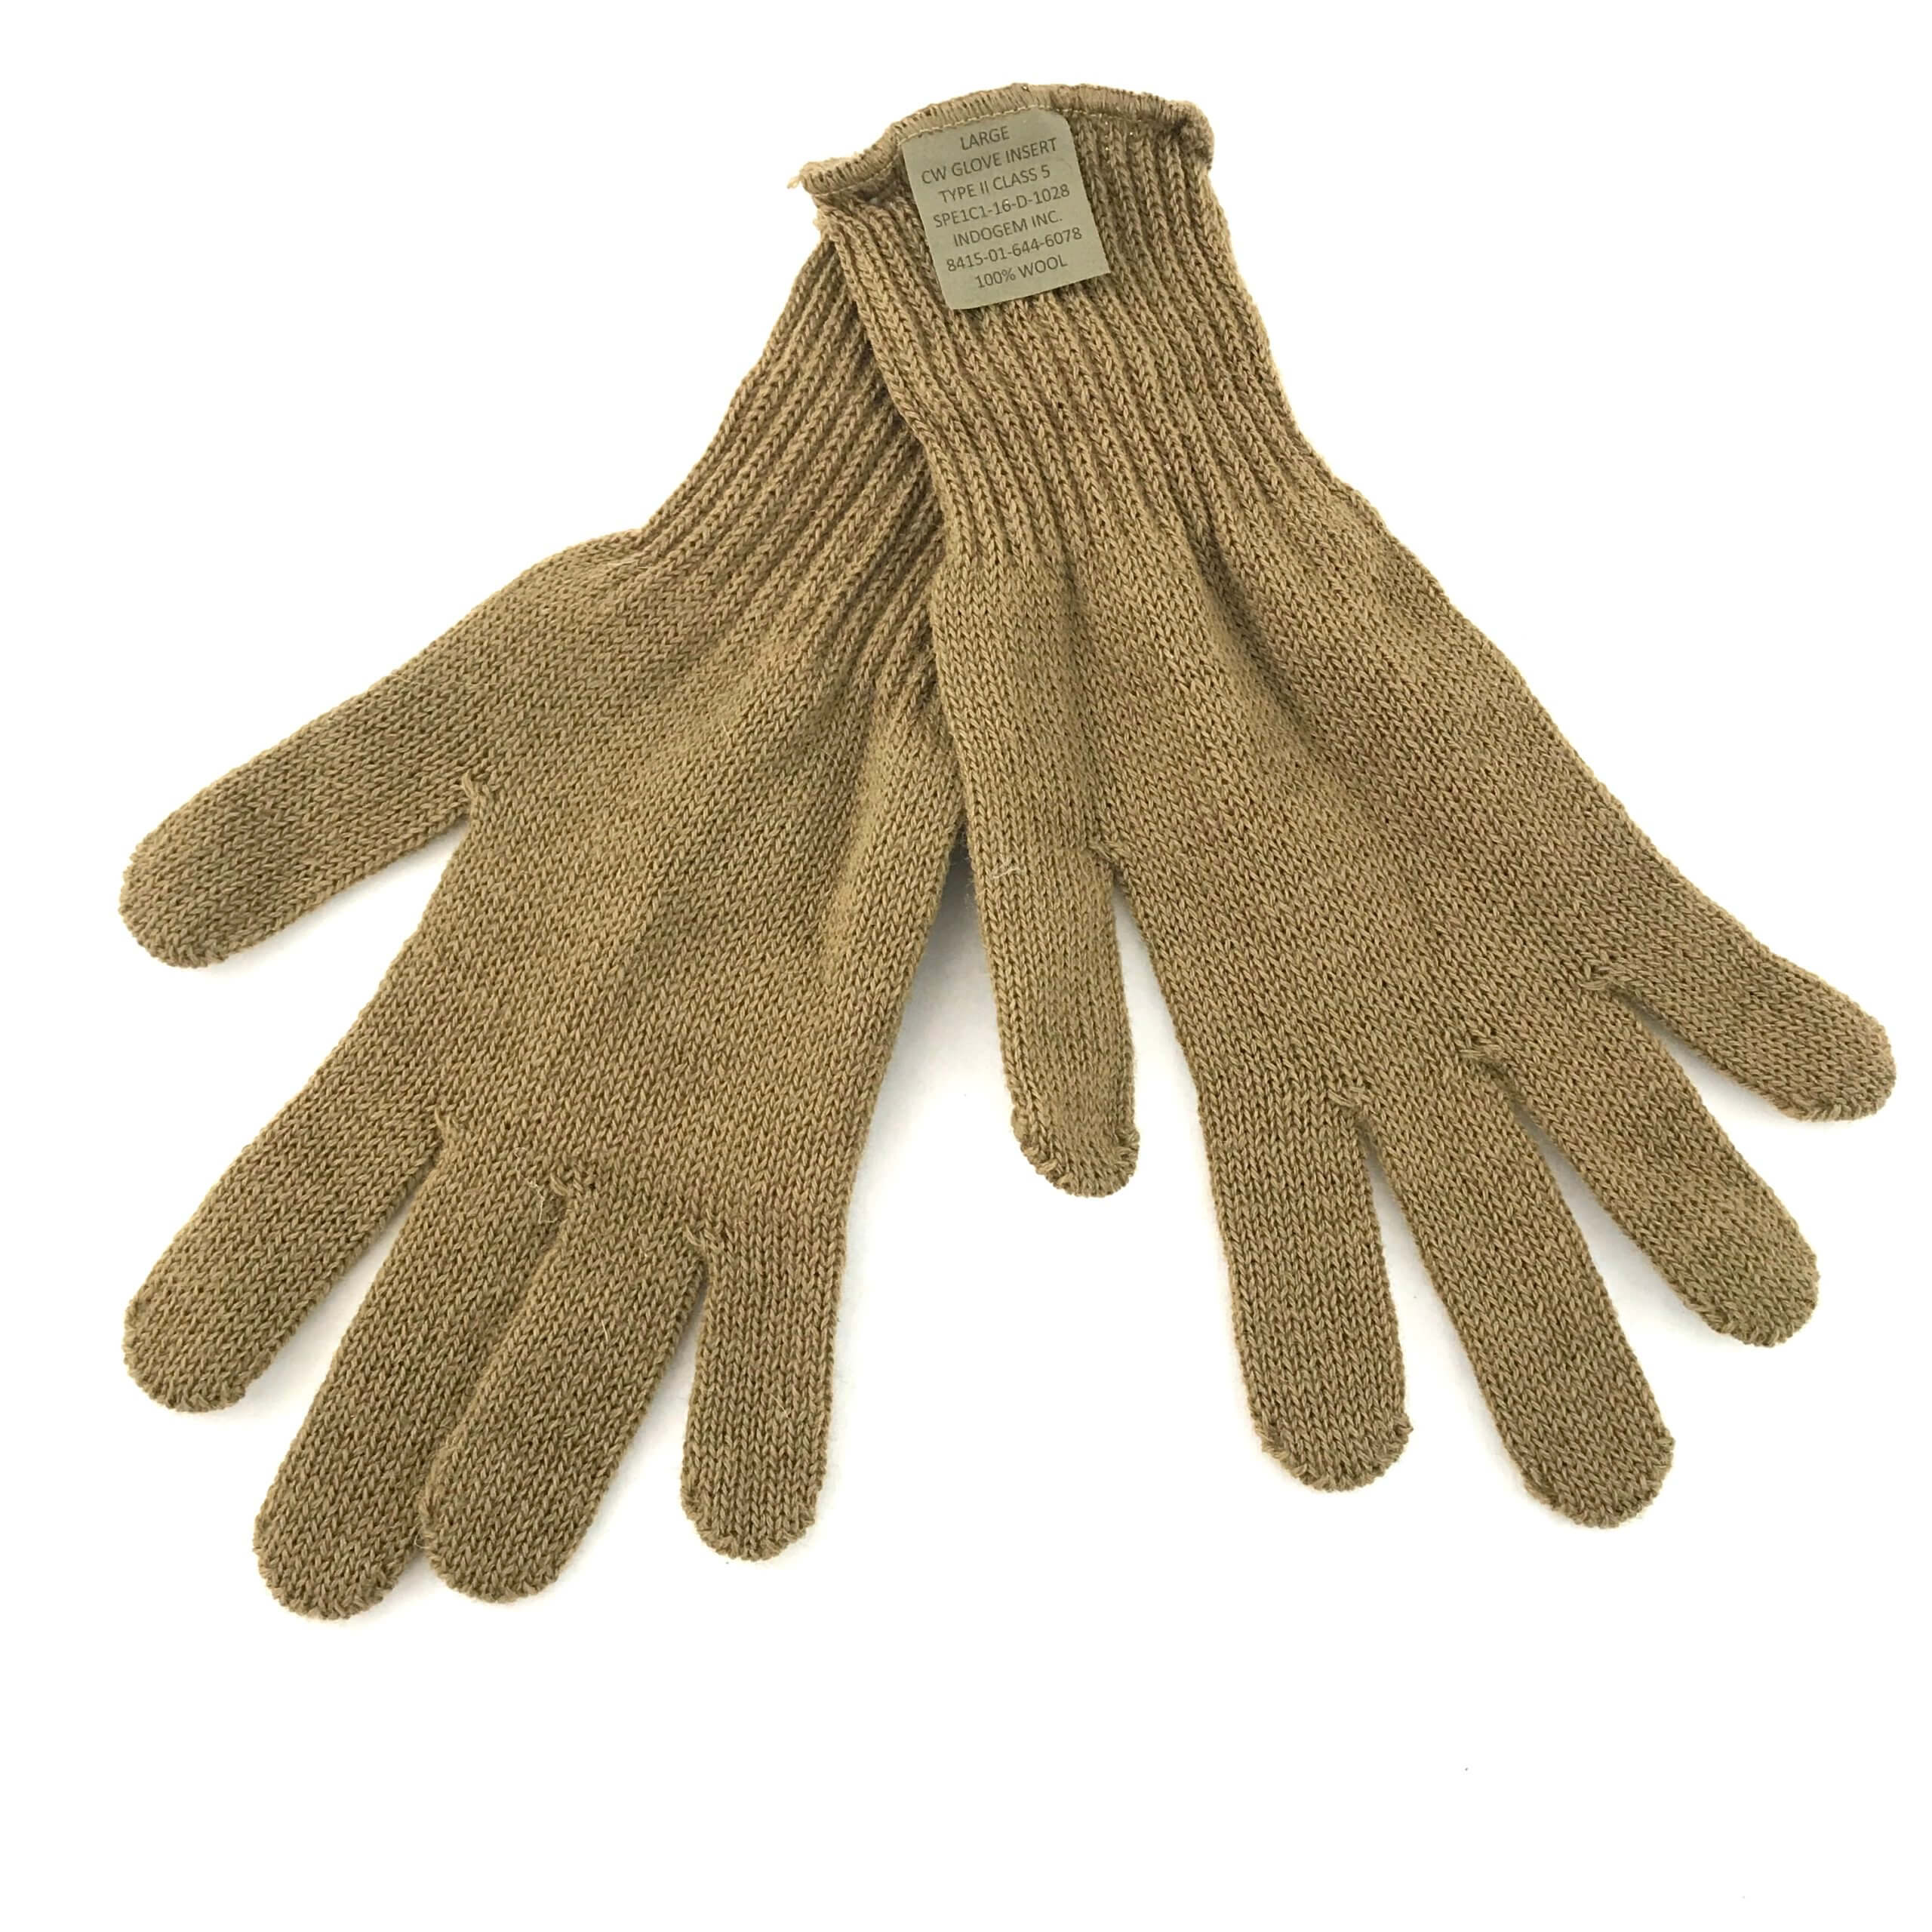 U.S MILITARY ISSUE COLD WEATHER GLOVE INSERTS LINERS SIZE X LARGE 